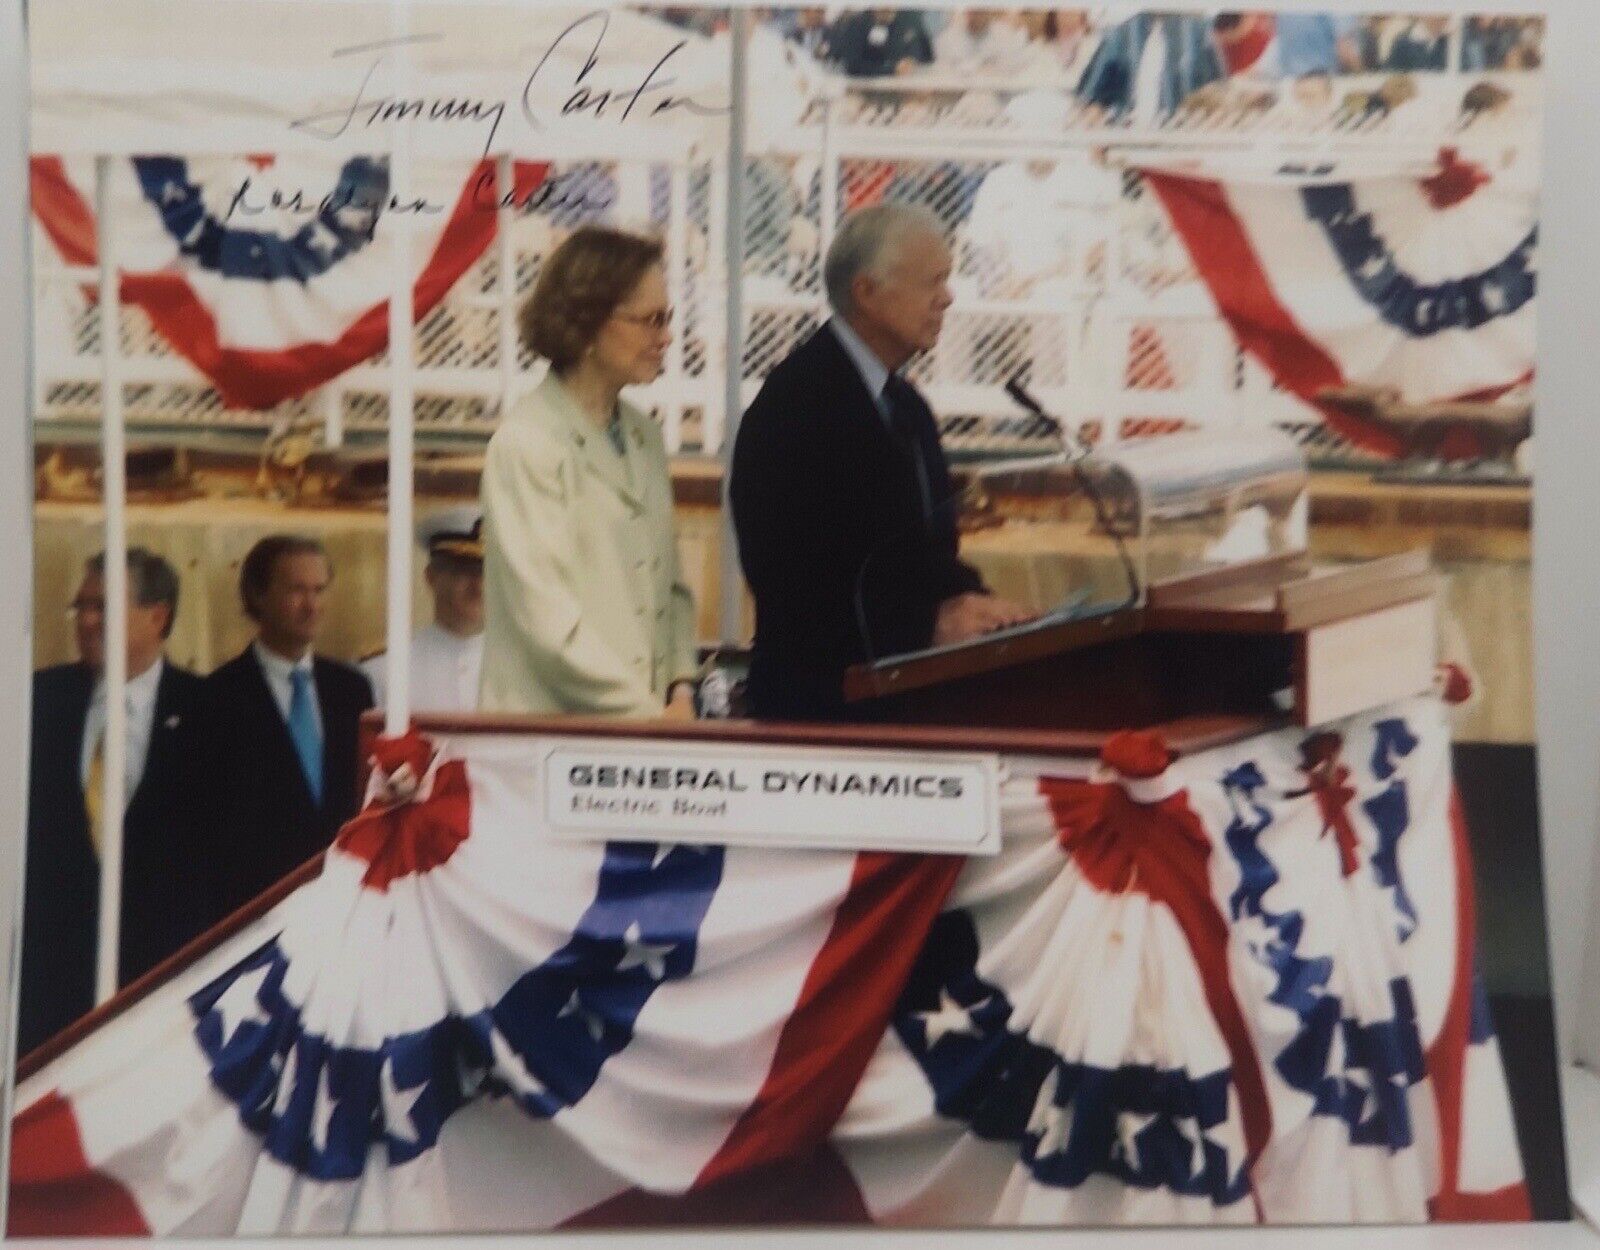 Jimmy Carter & Rosalynn Carter Signed 8x10 Photo Autographed Full Signature